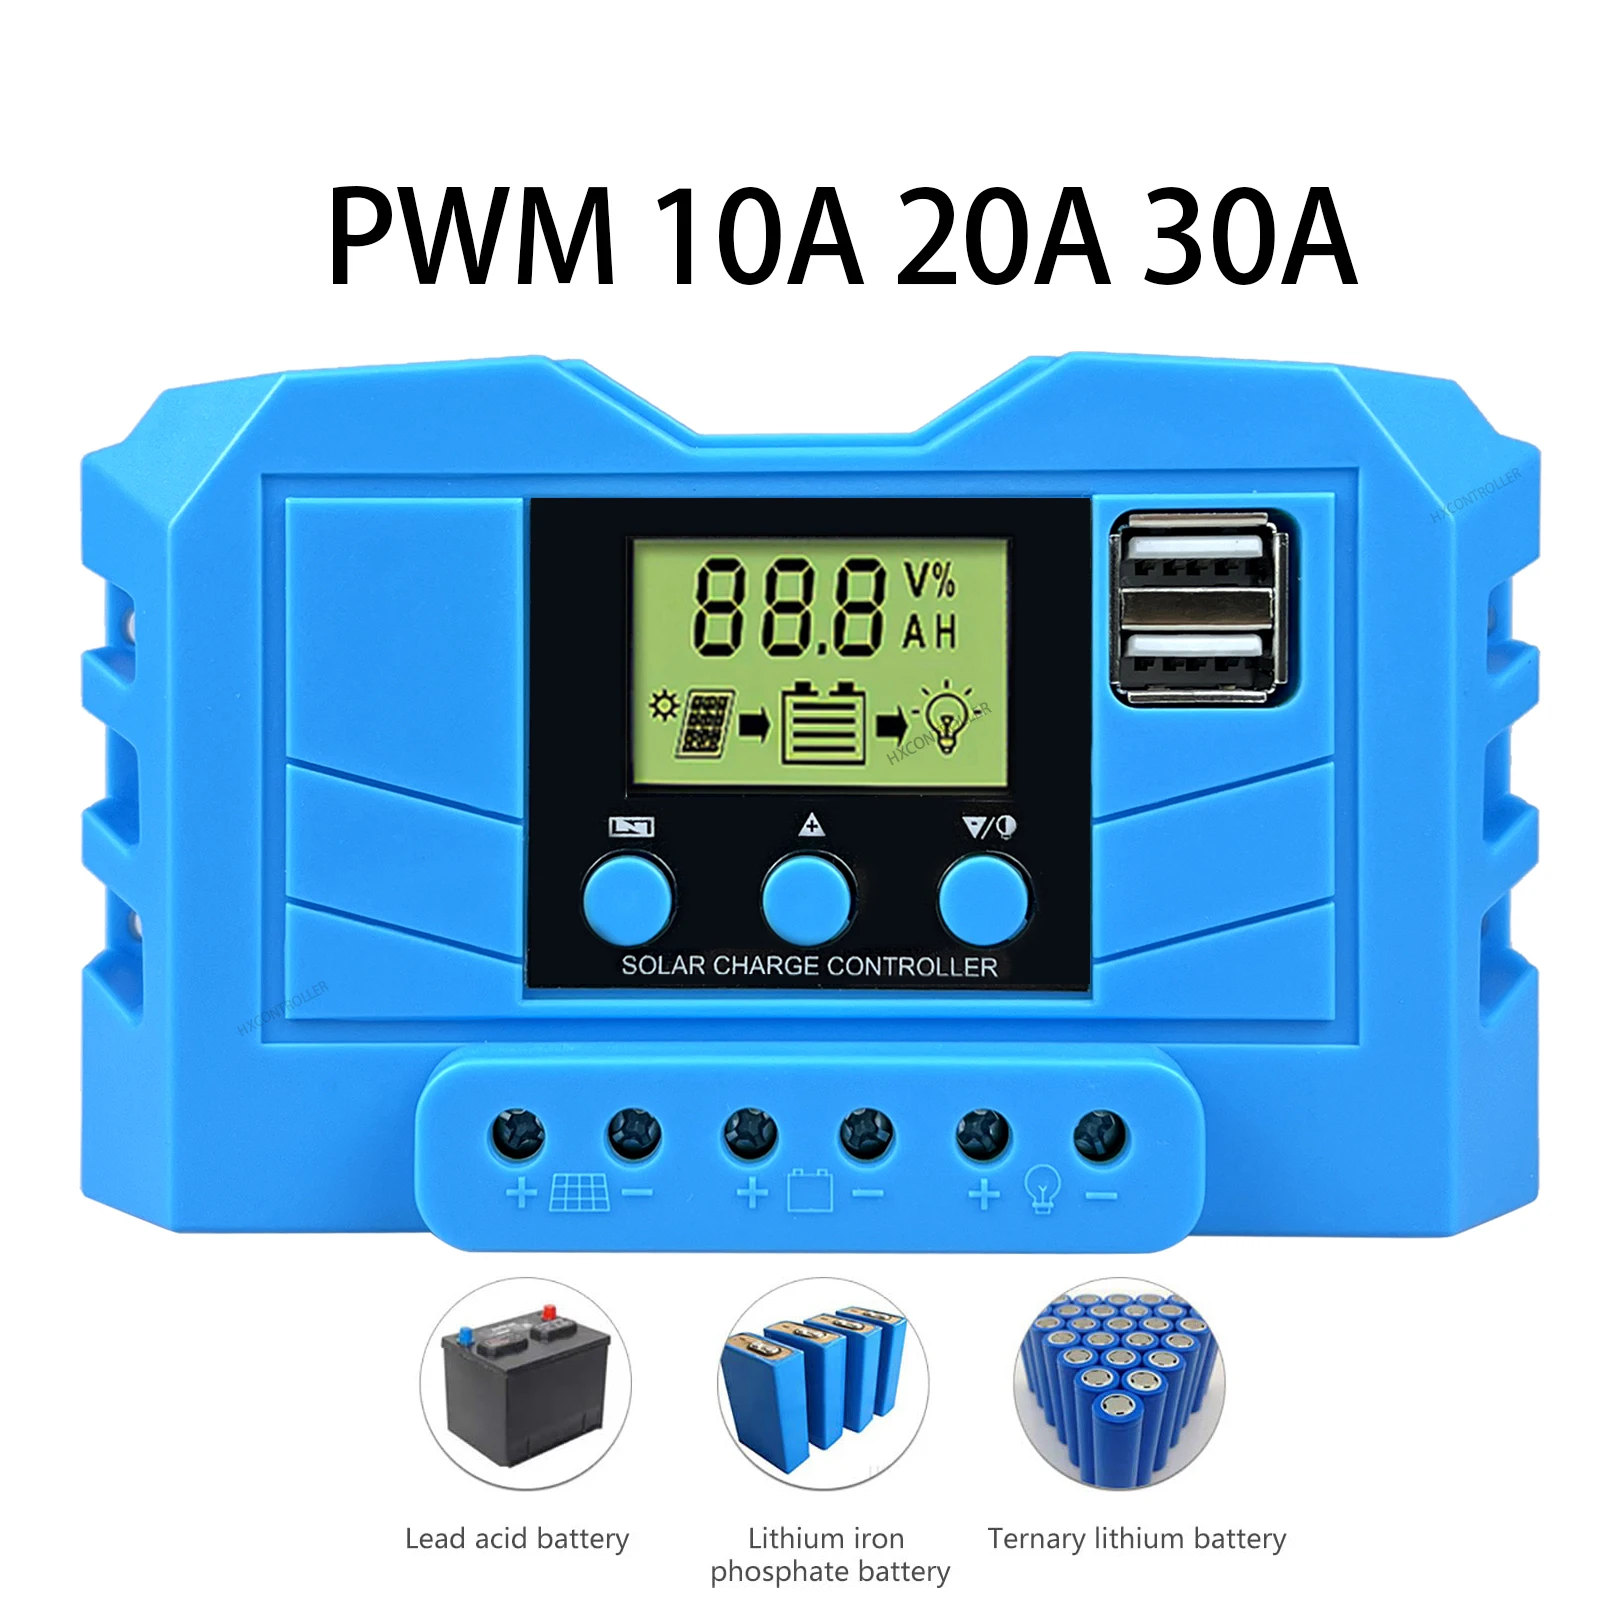 

PWM 30A 20A 10A Solar Charge Controller Battery Charger 12V 24V Auto LCD Display Dual USB 5V Output Solar Panel PV Regulator